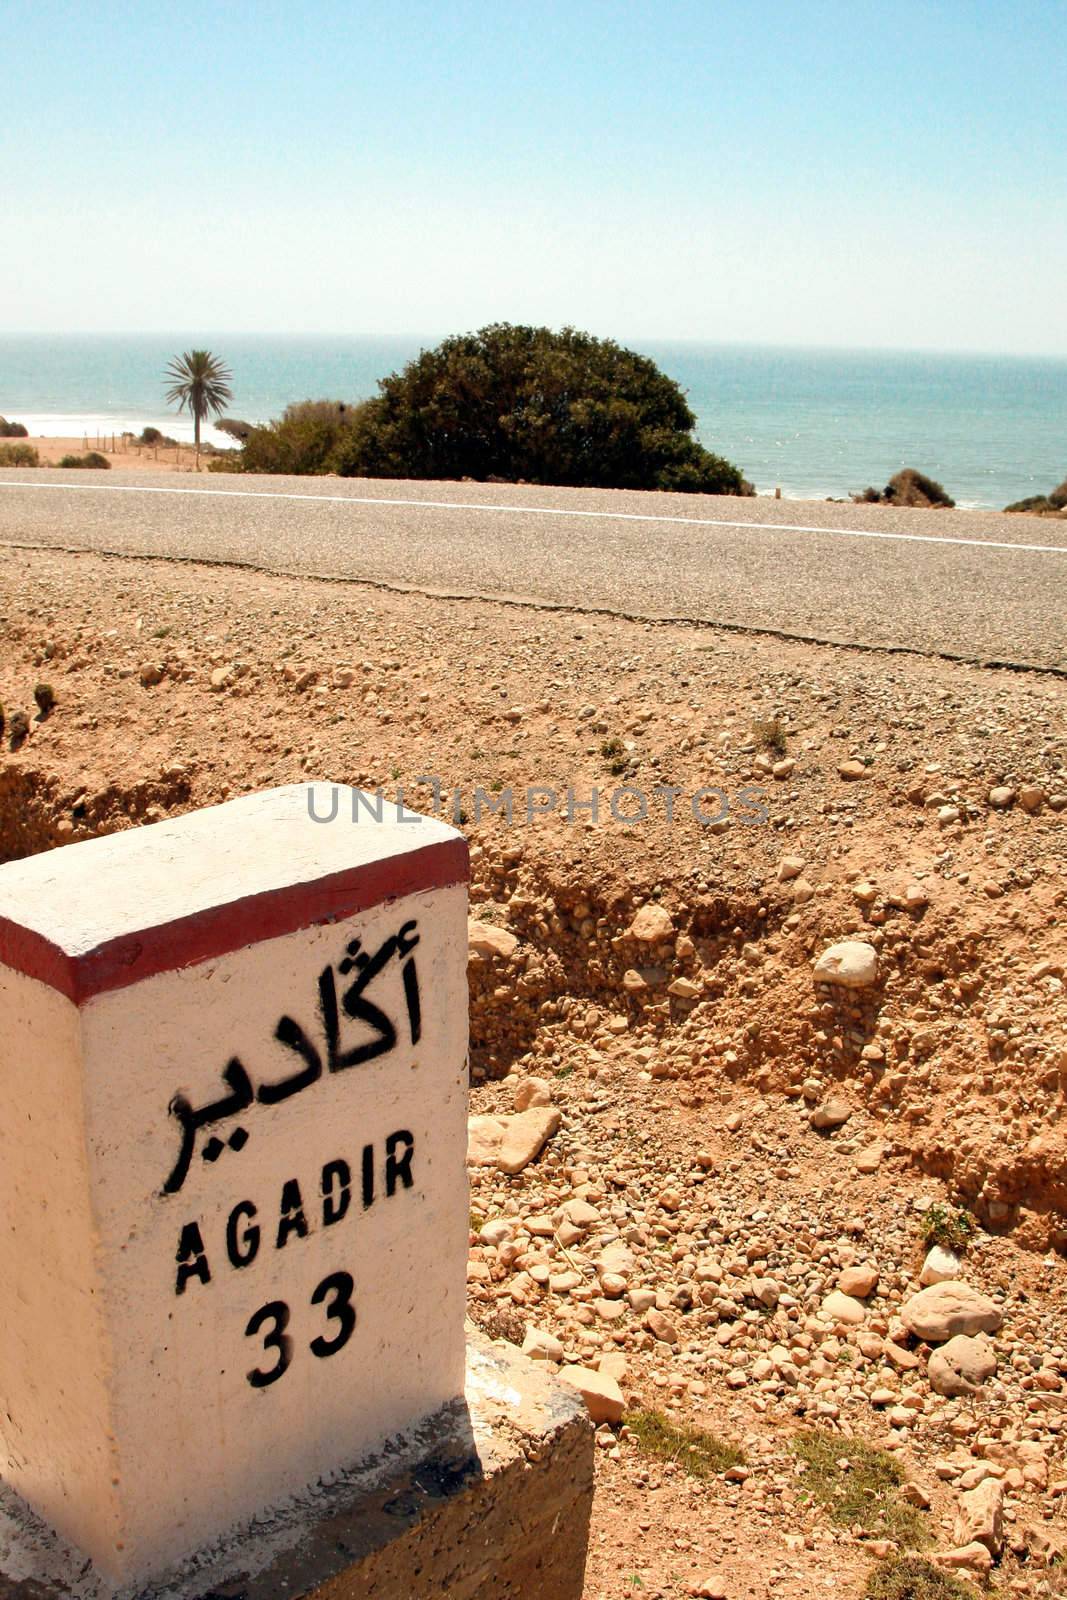 Sign road on the way to Agadir by watchtheworld